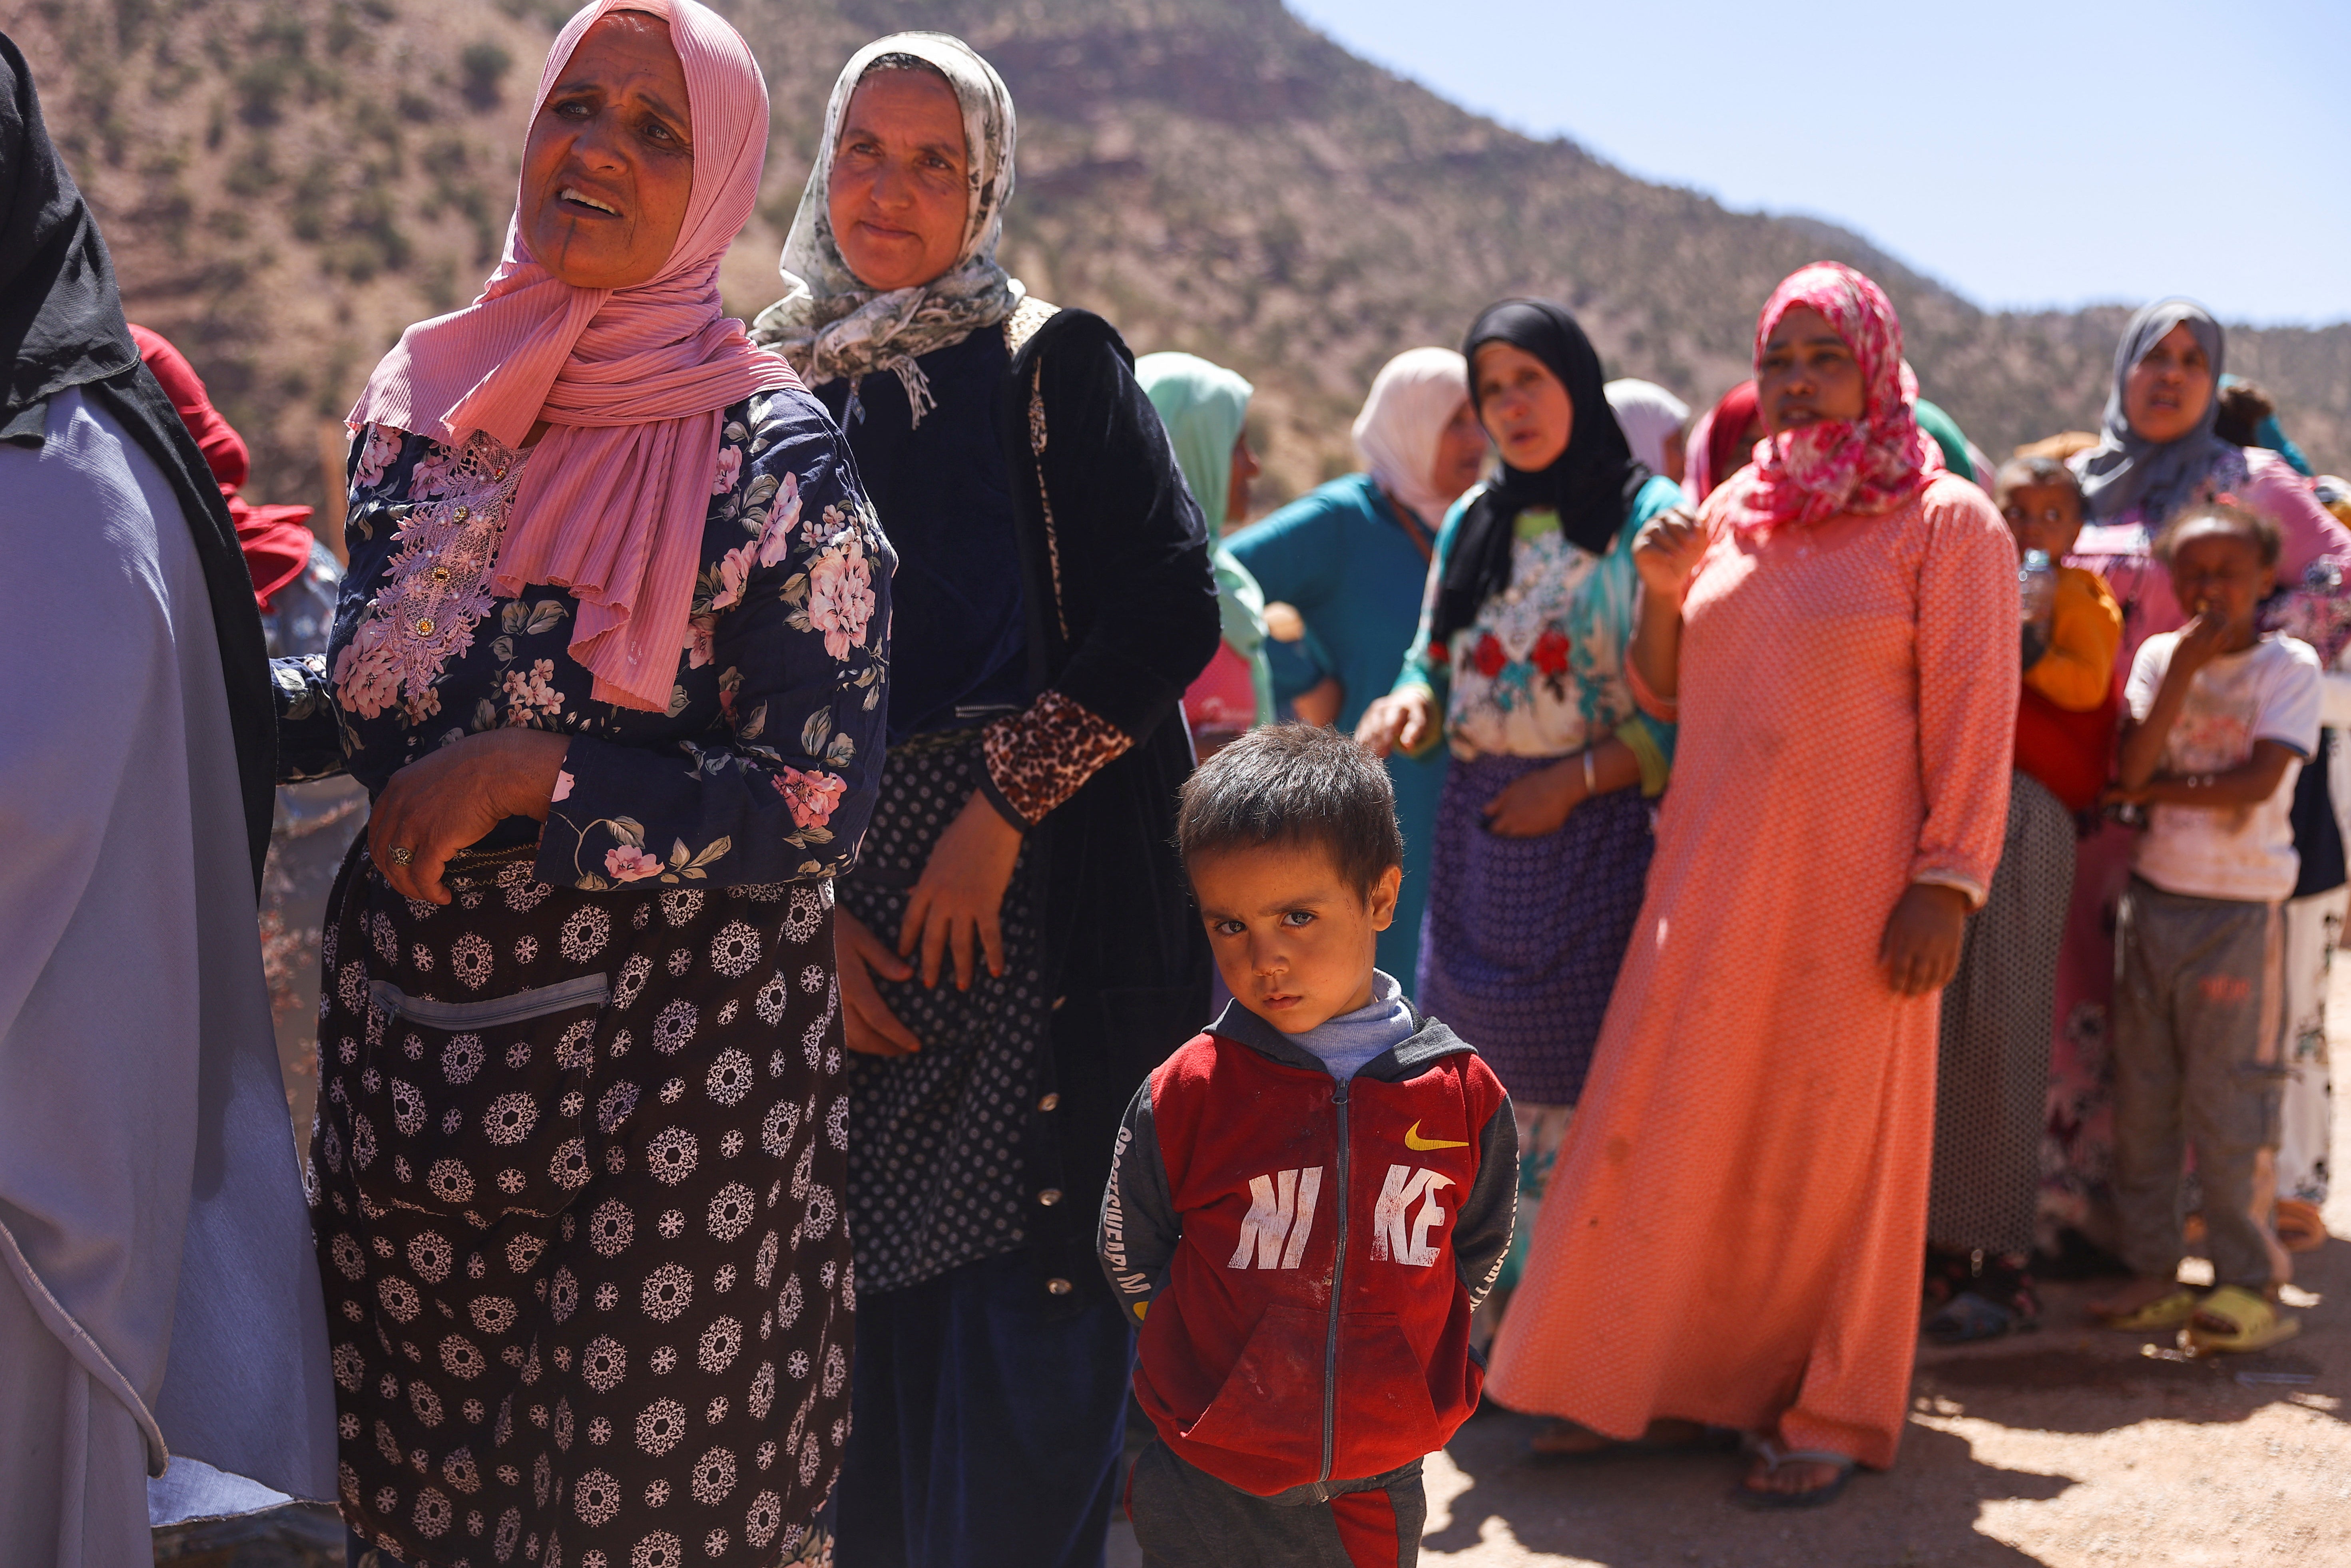 Women and children queue for aid in Tinmel in the aftermath of a deadly earthquake